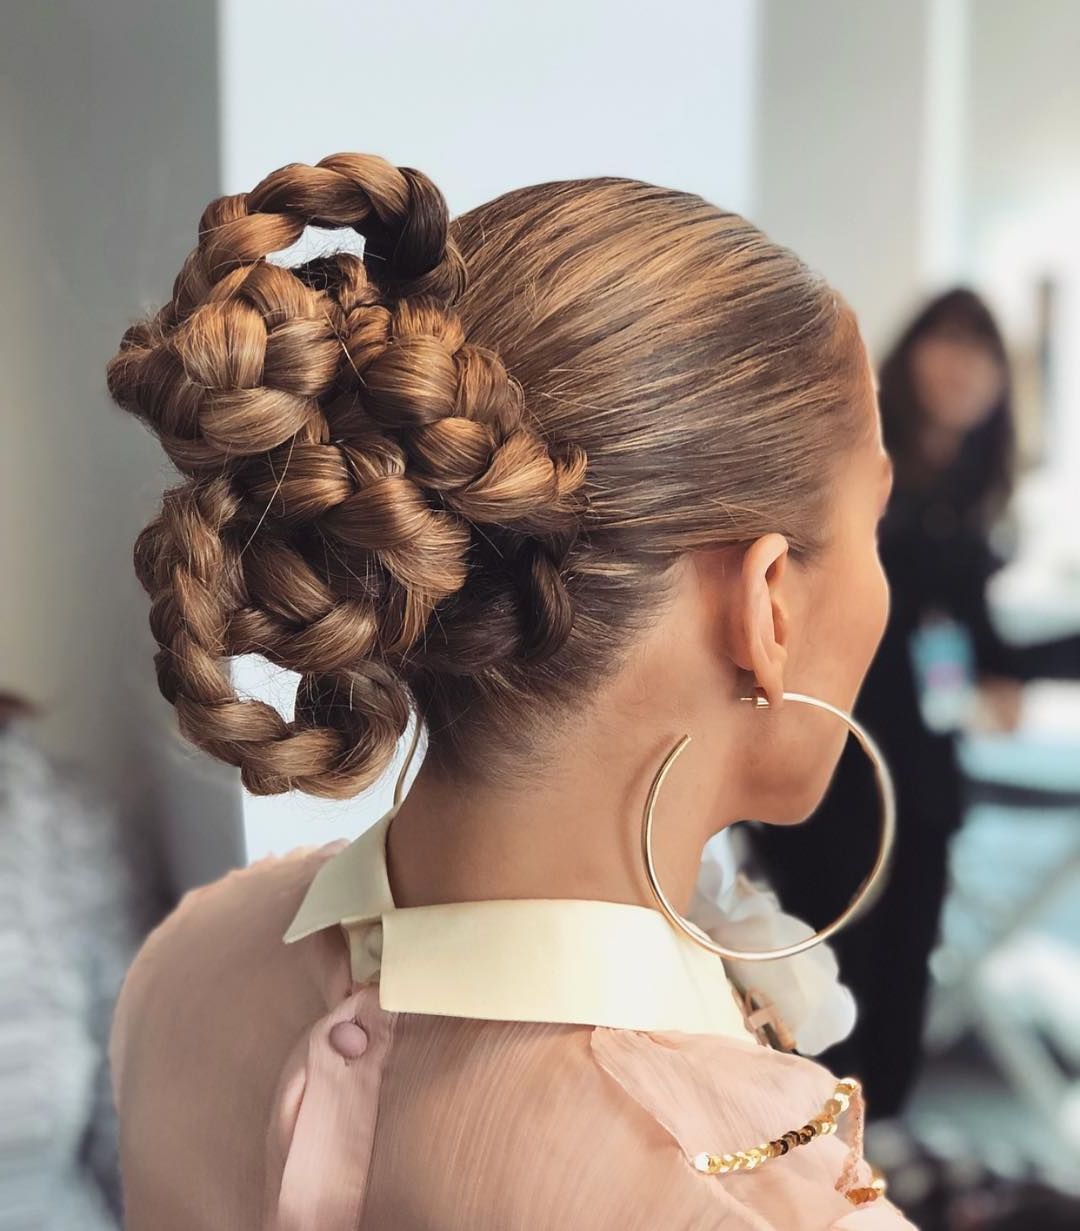 20 Braided Updo Hairstyles – Pictures Of Pretty Updos With Braids Pertaining To Braided Updo For Long Hair (View 22 of 25)